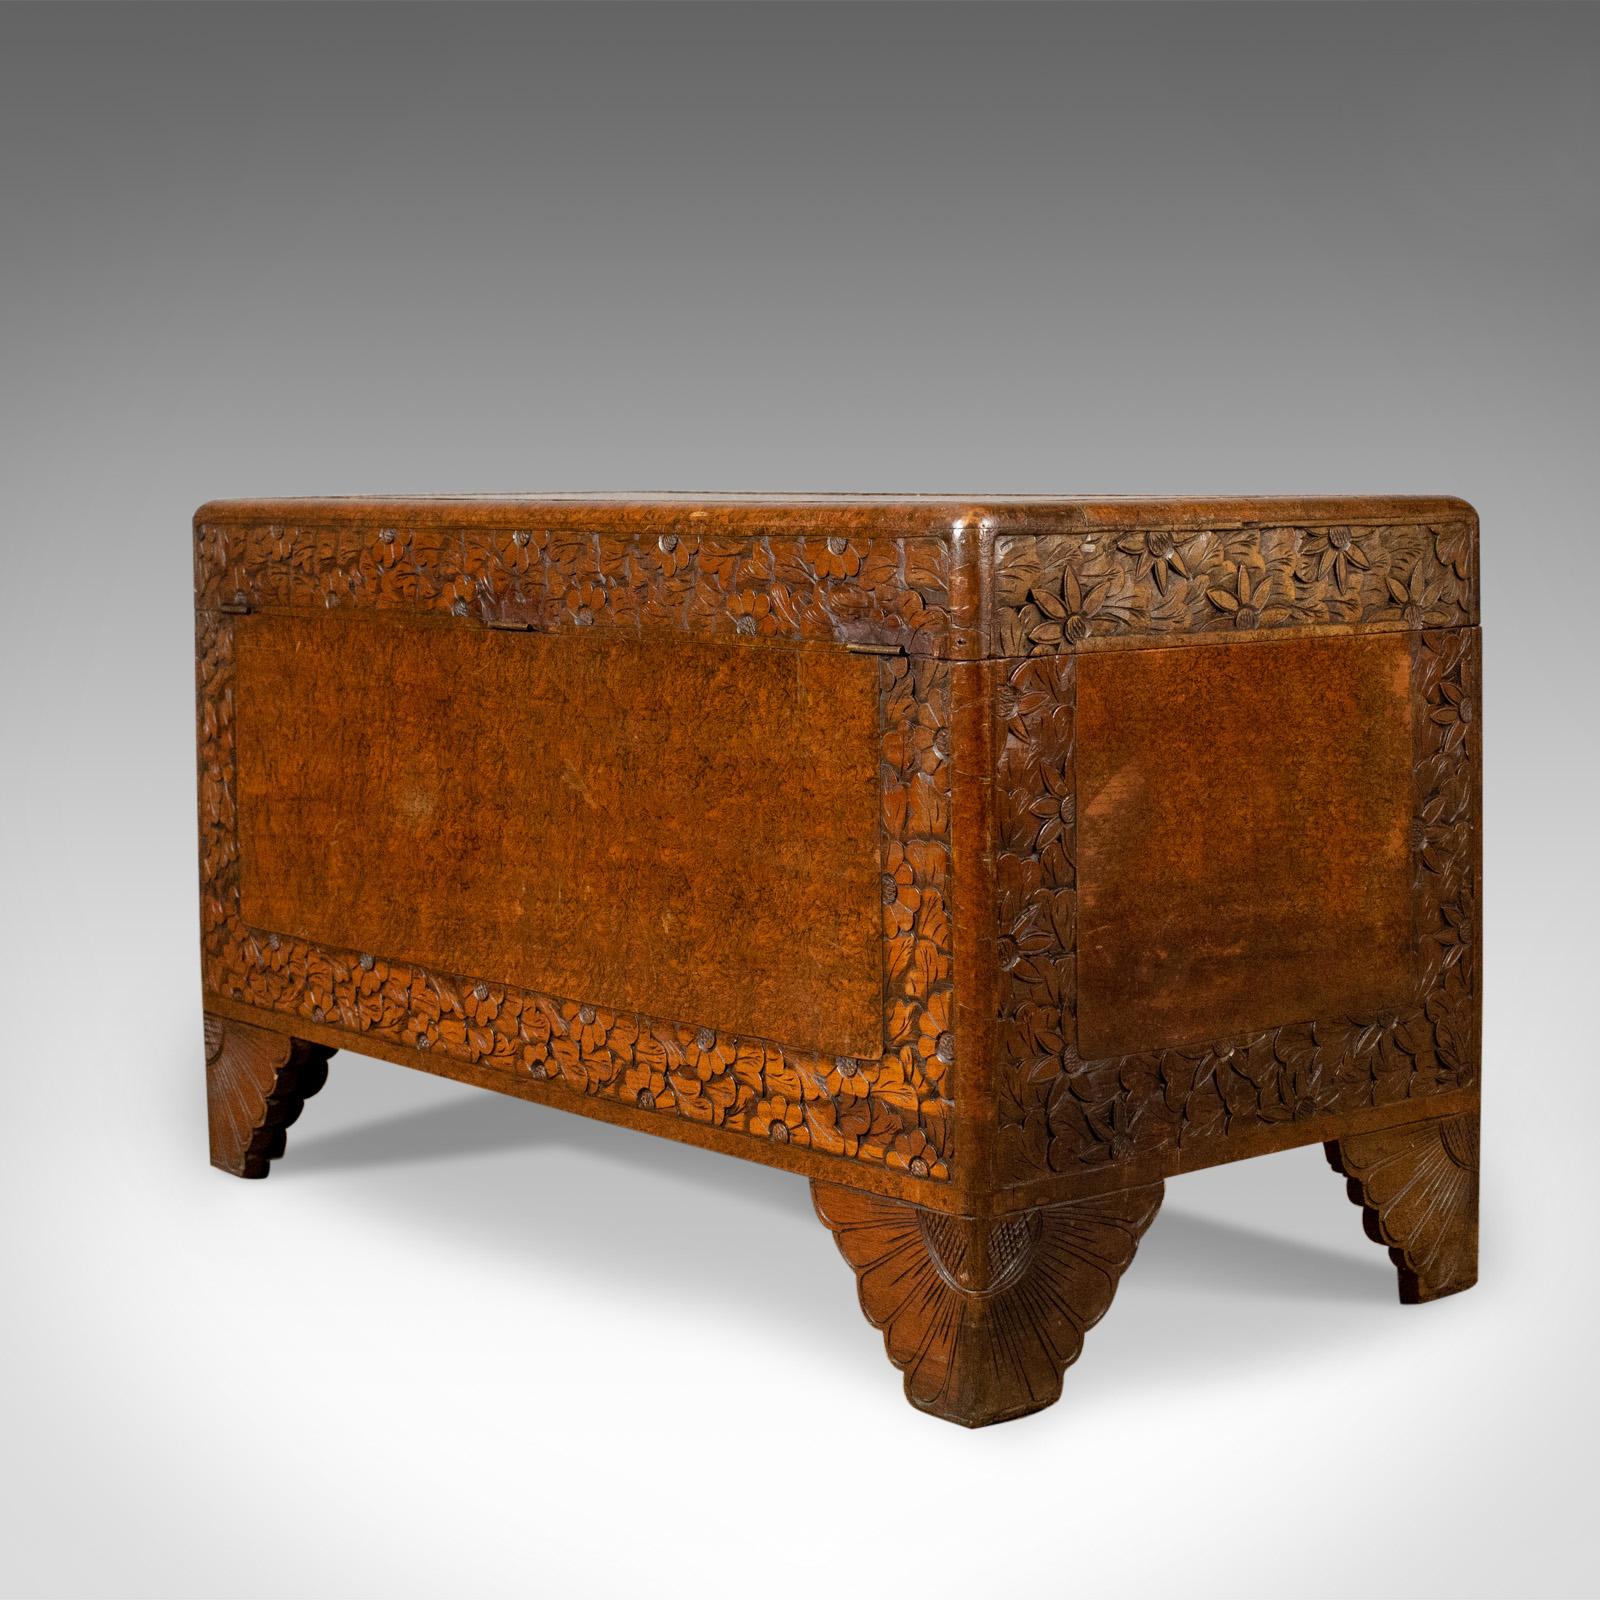 Chinese Camphor Wood Trunk, Oriental, Carved, Chest, Art Deco, circa 1940